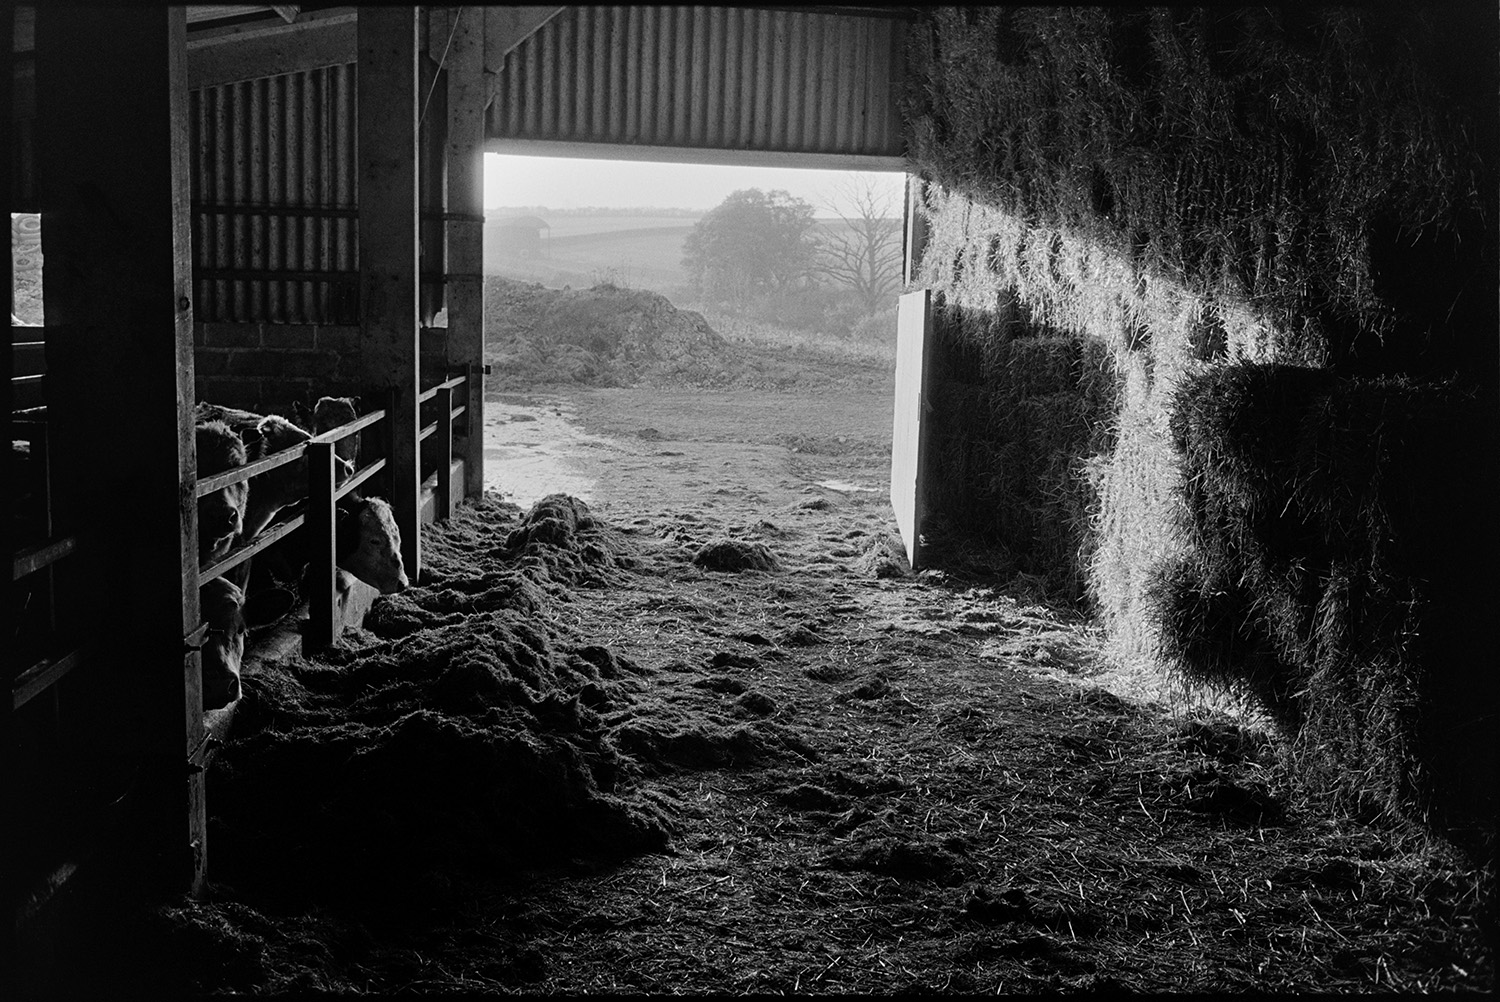 Interior of barn with cattle feeding. 
[Cattle eating hay or silage in a barn at Spittle Farm, Chulmleigh. On the opposite side of the barn are stacks of hay bales.]